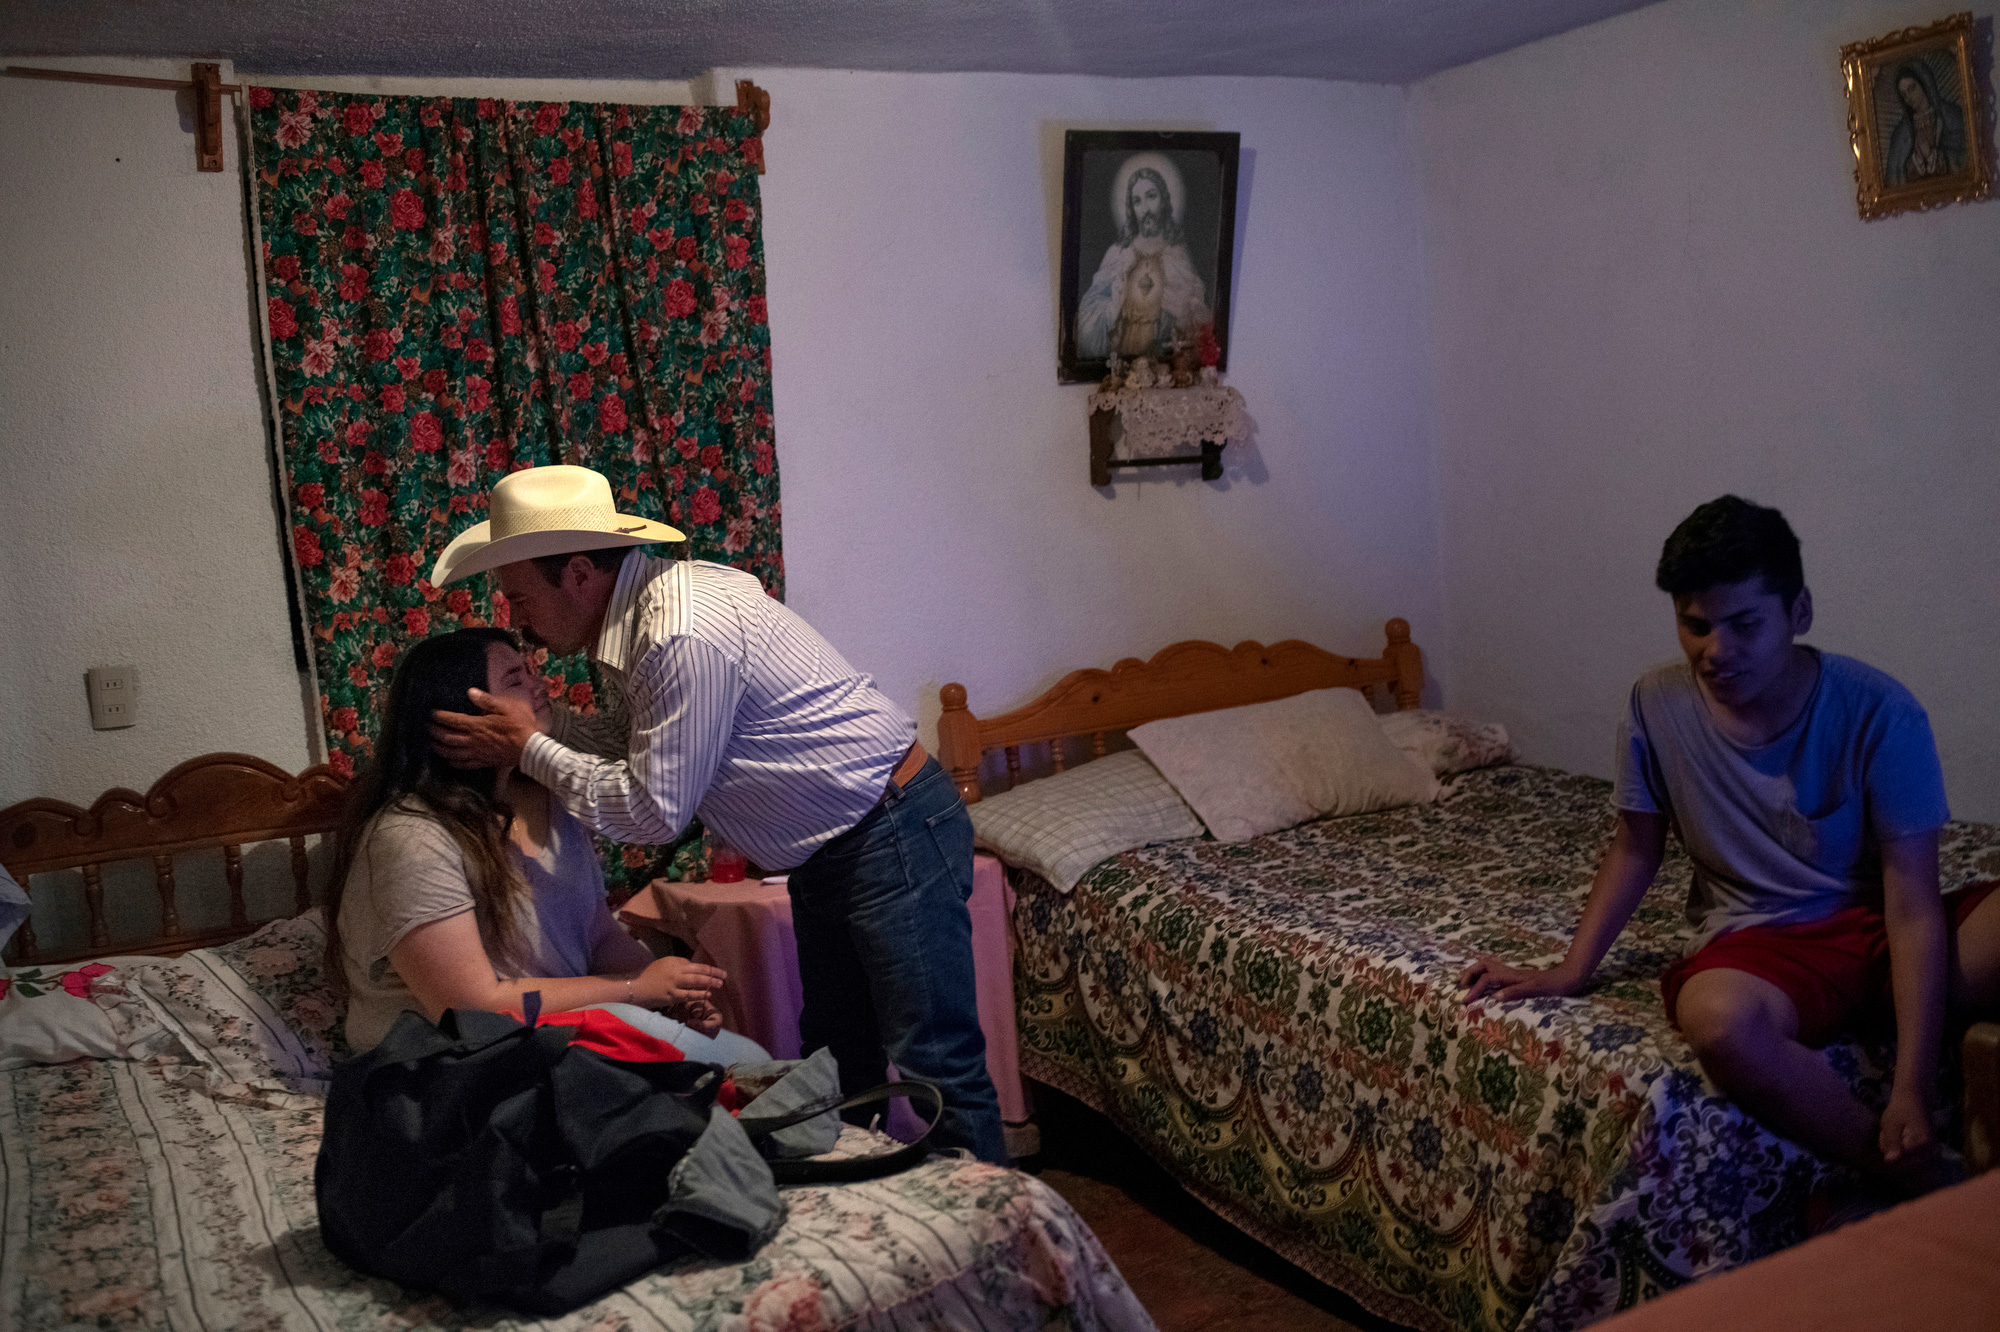 On the left side of this photograph a middle-aged man (Luis) leans down to kiss a teenage girl (Lulys) on her forehead. Lulys is wearing a gray t-shirt, and she is sitting on a twin bed with a floral bedspread. Luis wears a straw cowboy hat, a blue-and-white striped, button-down shirt, and jeans. On the right side of the photograph, a teenage boy (Bryan) sits on another twin bed with a floral bedspread. Bryan wears shorts and a T-shirt. A painting of Jesus hangs above a mounted altar on the wall above Bryan’s bed.